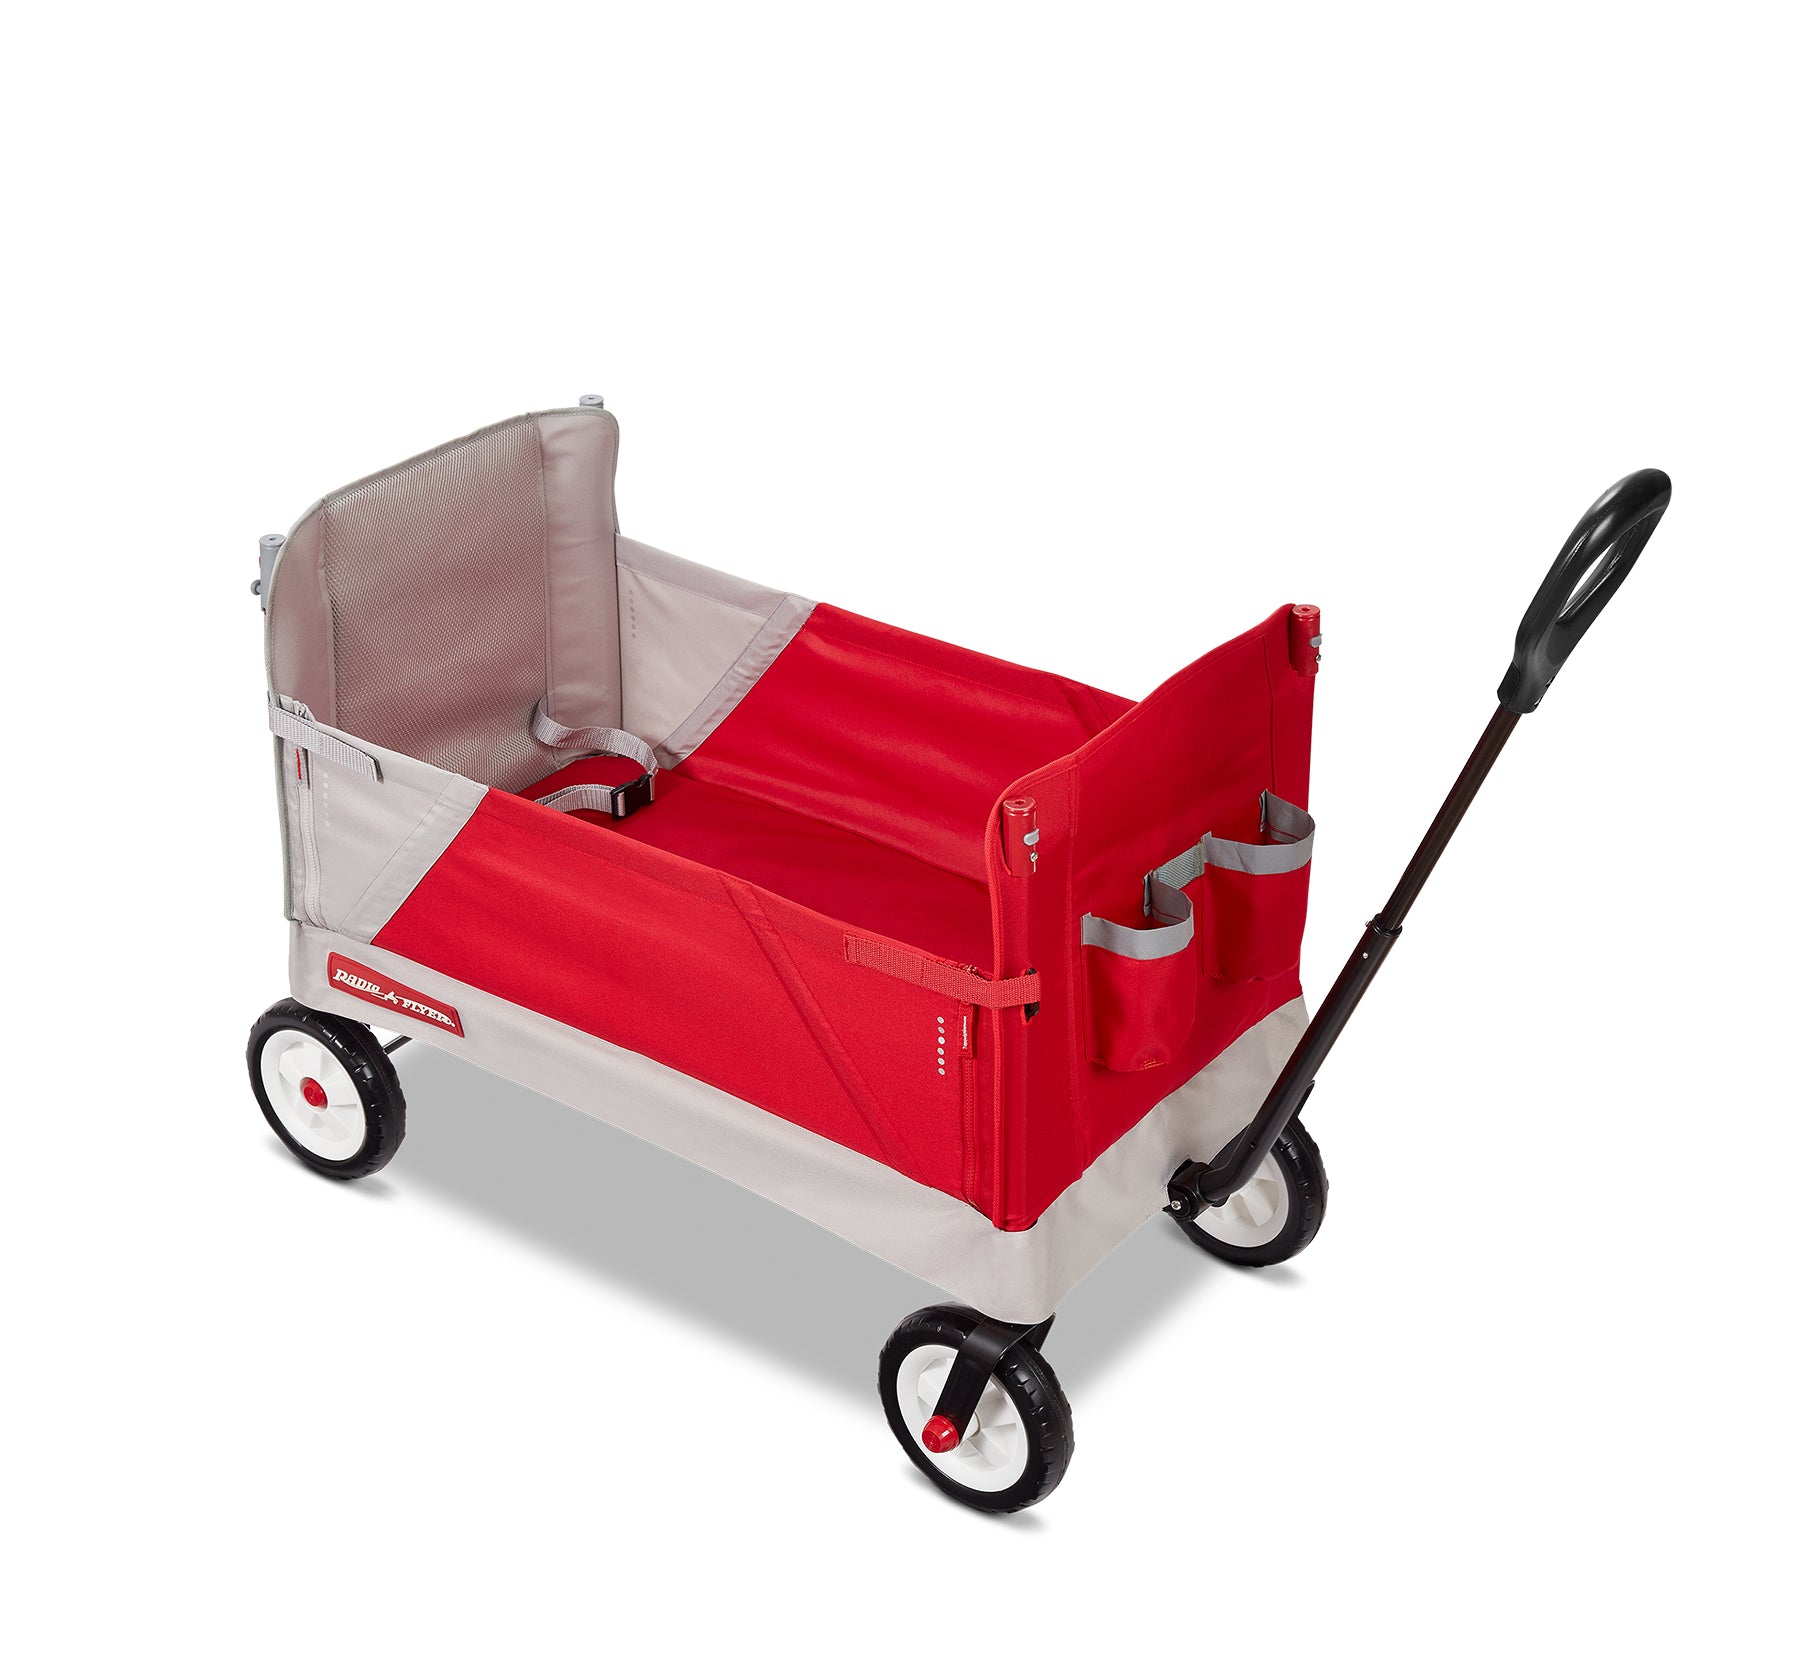 Radio Flyer Collections: Toys & Ride-Ons | Radio Flyer